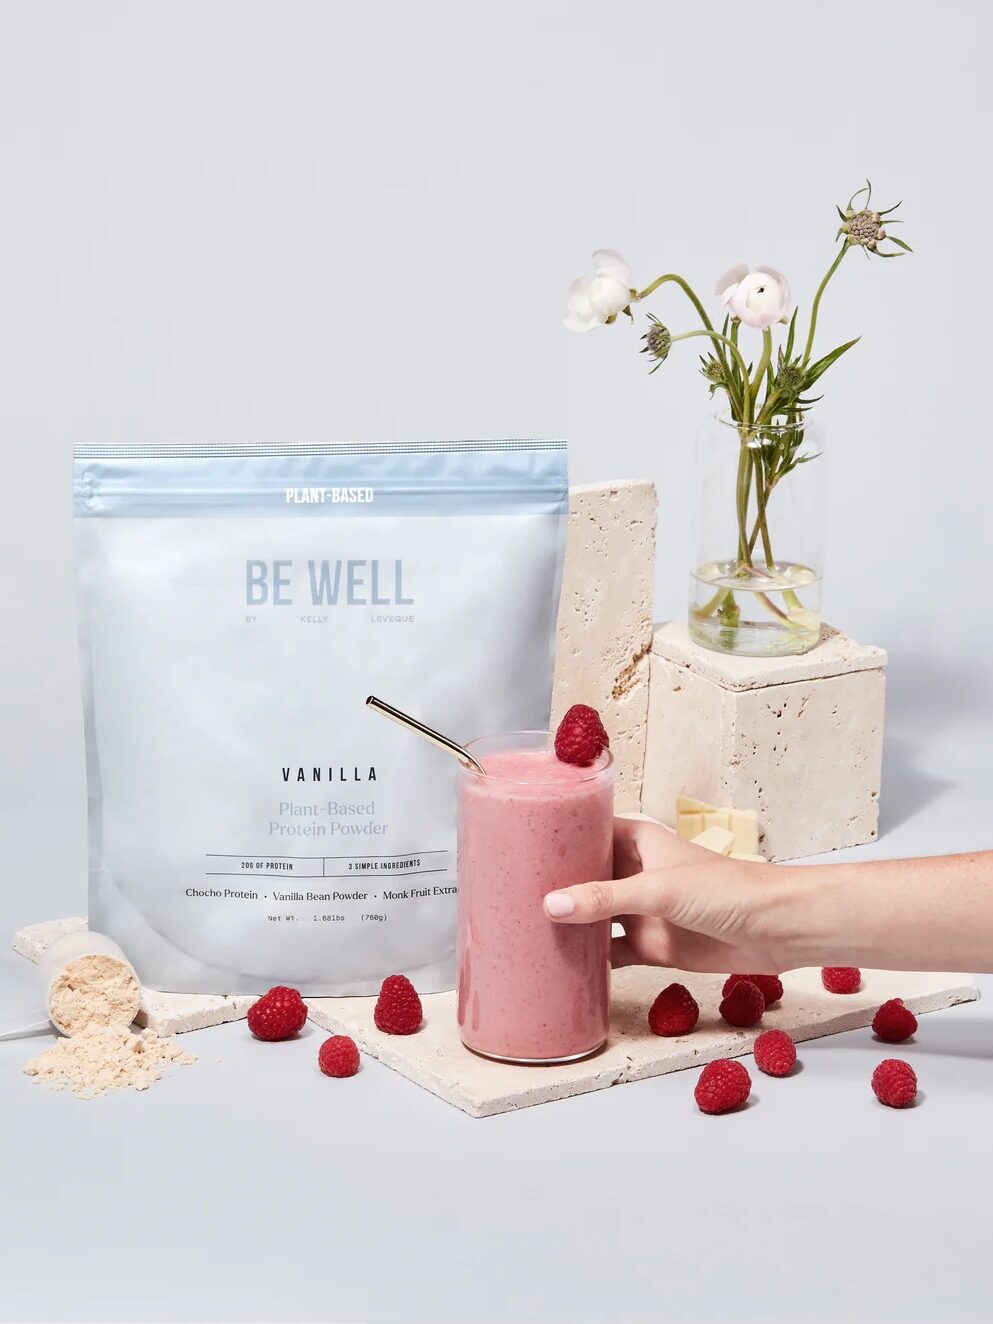 A bag of Be Well protein powder sits in a tableau with a pink smoothie, some scattered raspberries, a vase of white ranunculus flowers, and a few white stone blocks.